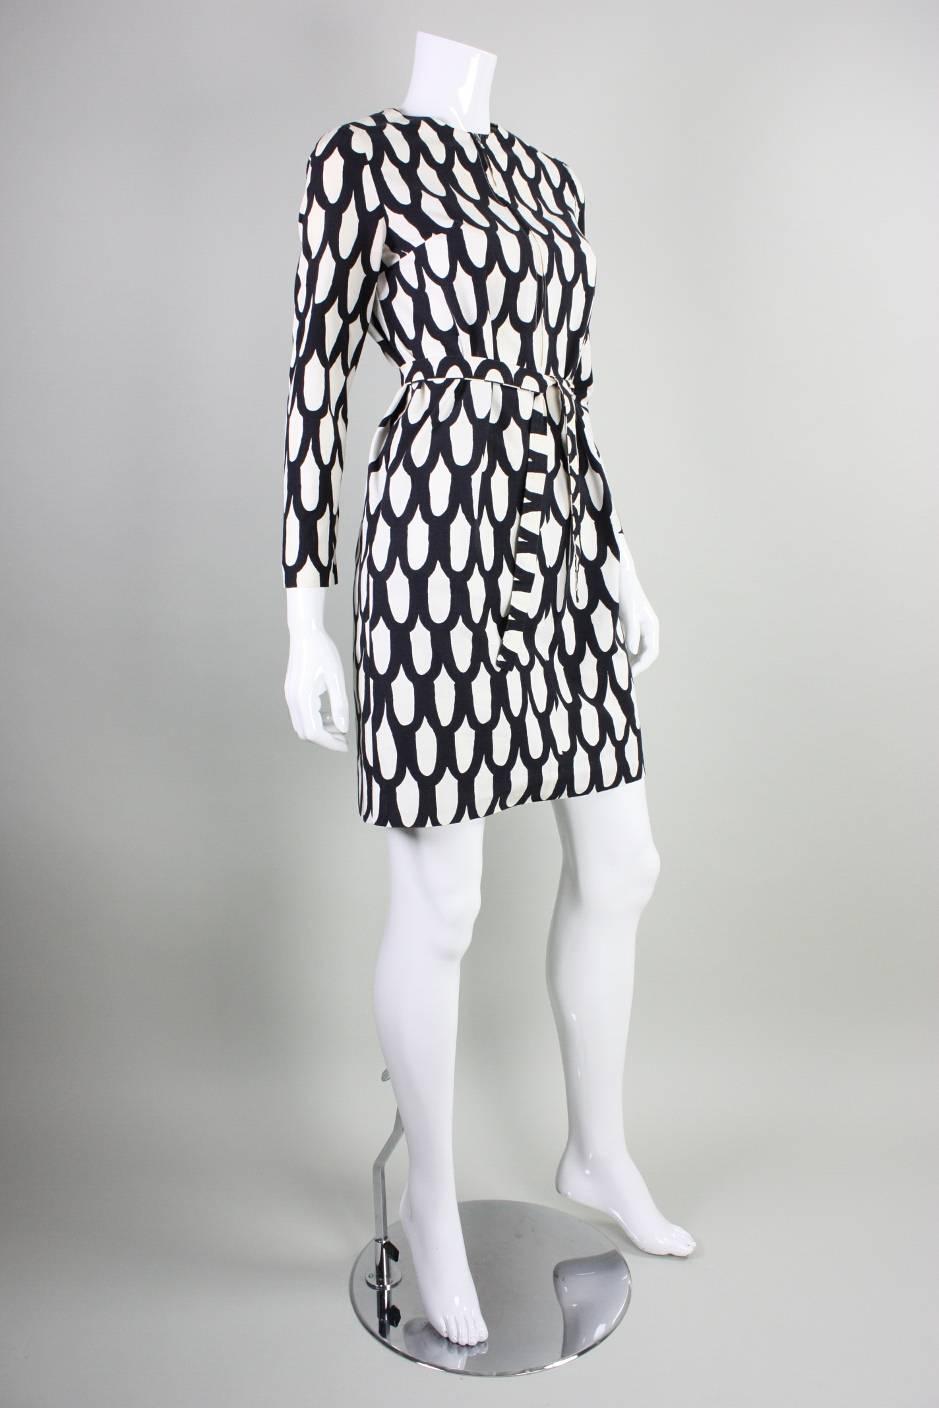 Vintage mini dress from Marimekko dates to 1965 and is made of white cotton with a black allover optical print. Long tapered sleeves.  Center front zippered closure extends to stomach.  Unlined.  Optional detached sash.

Labeled a vintage size 8. 